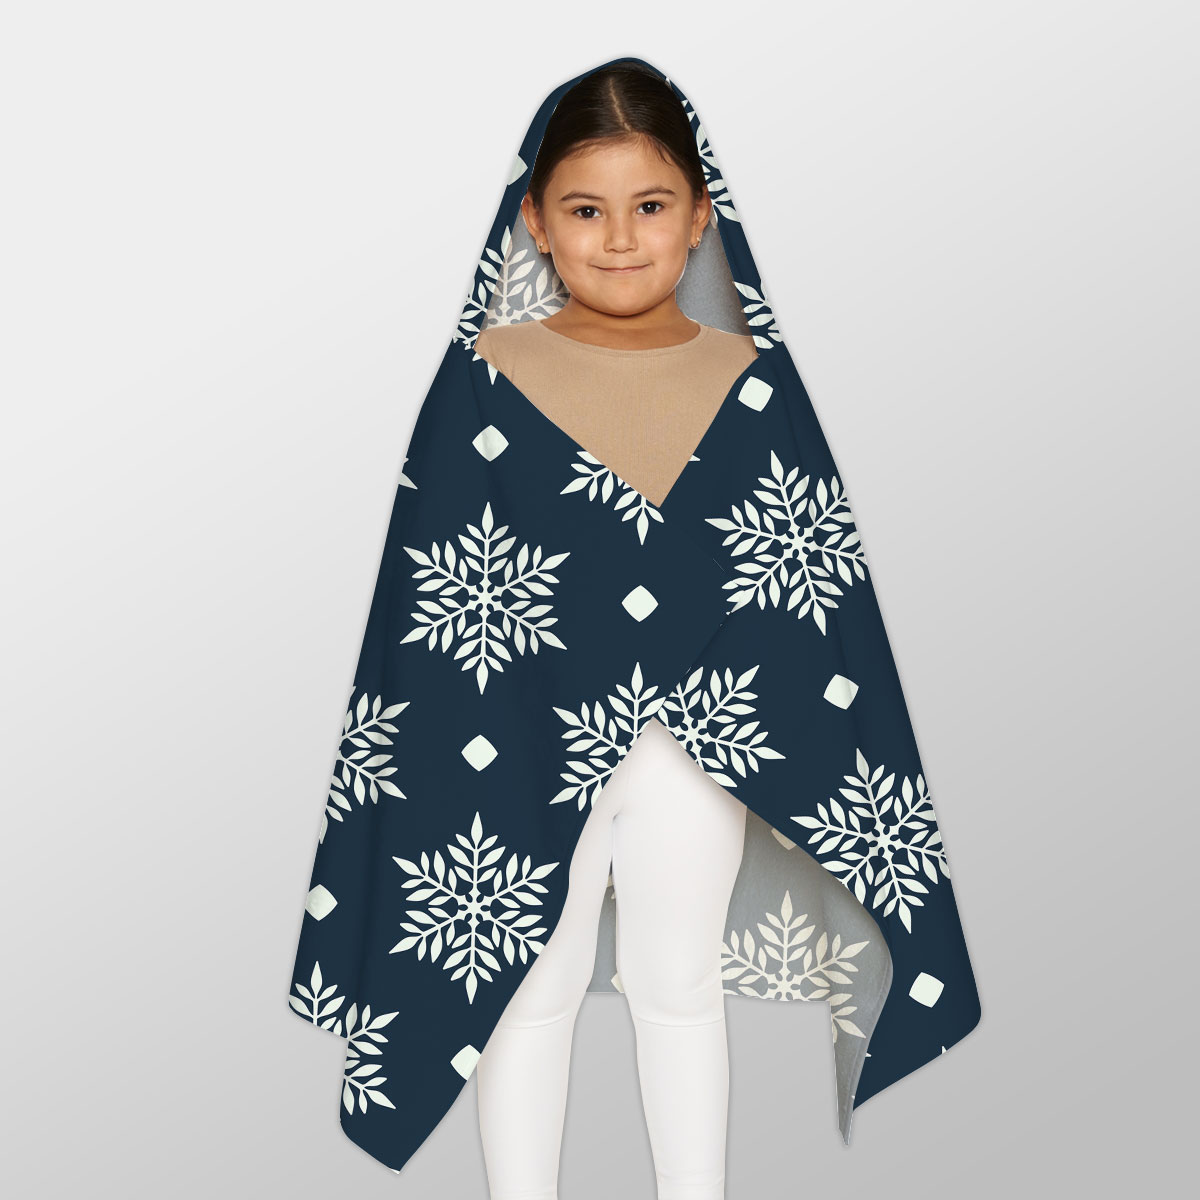 Snowflake On Dark Blue Background Youth Hooded Towel